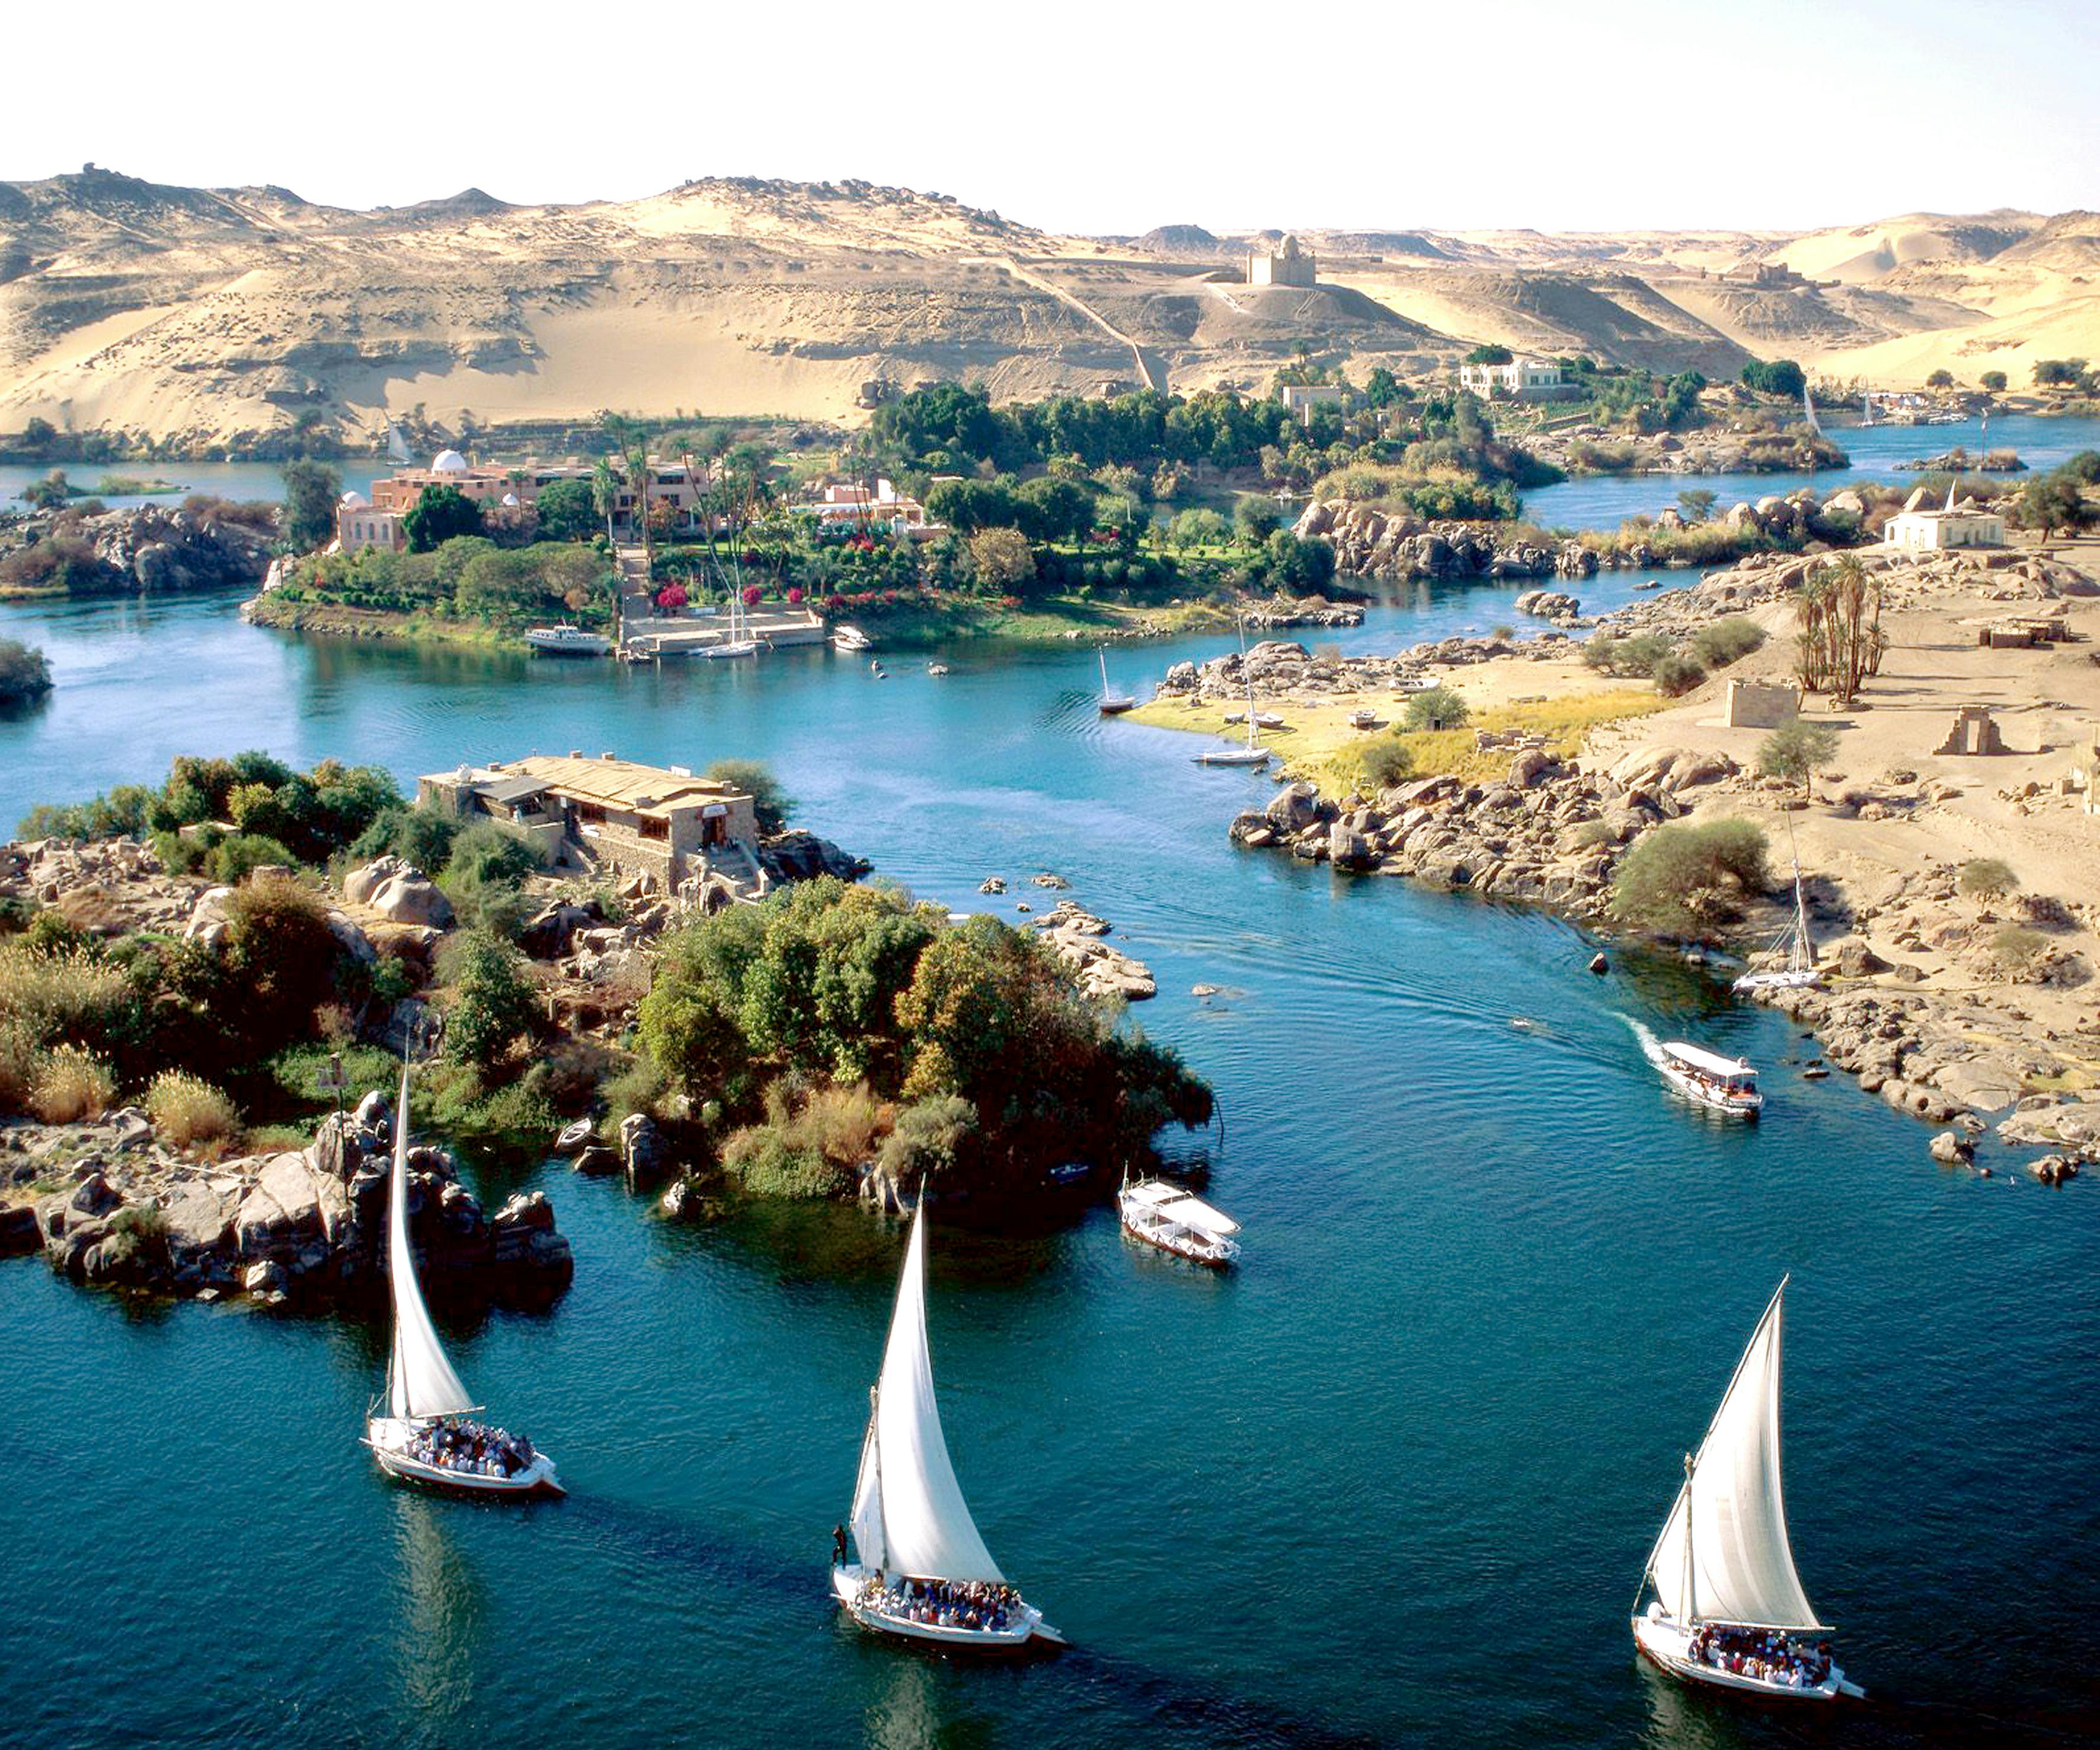 Aswan tour with home cooked meal